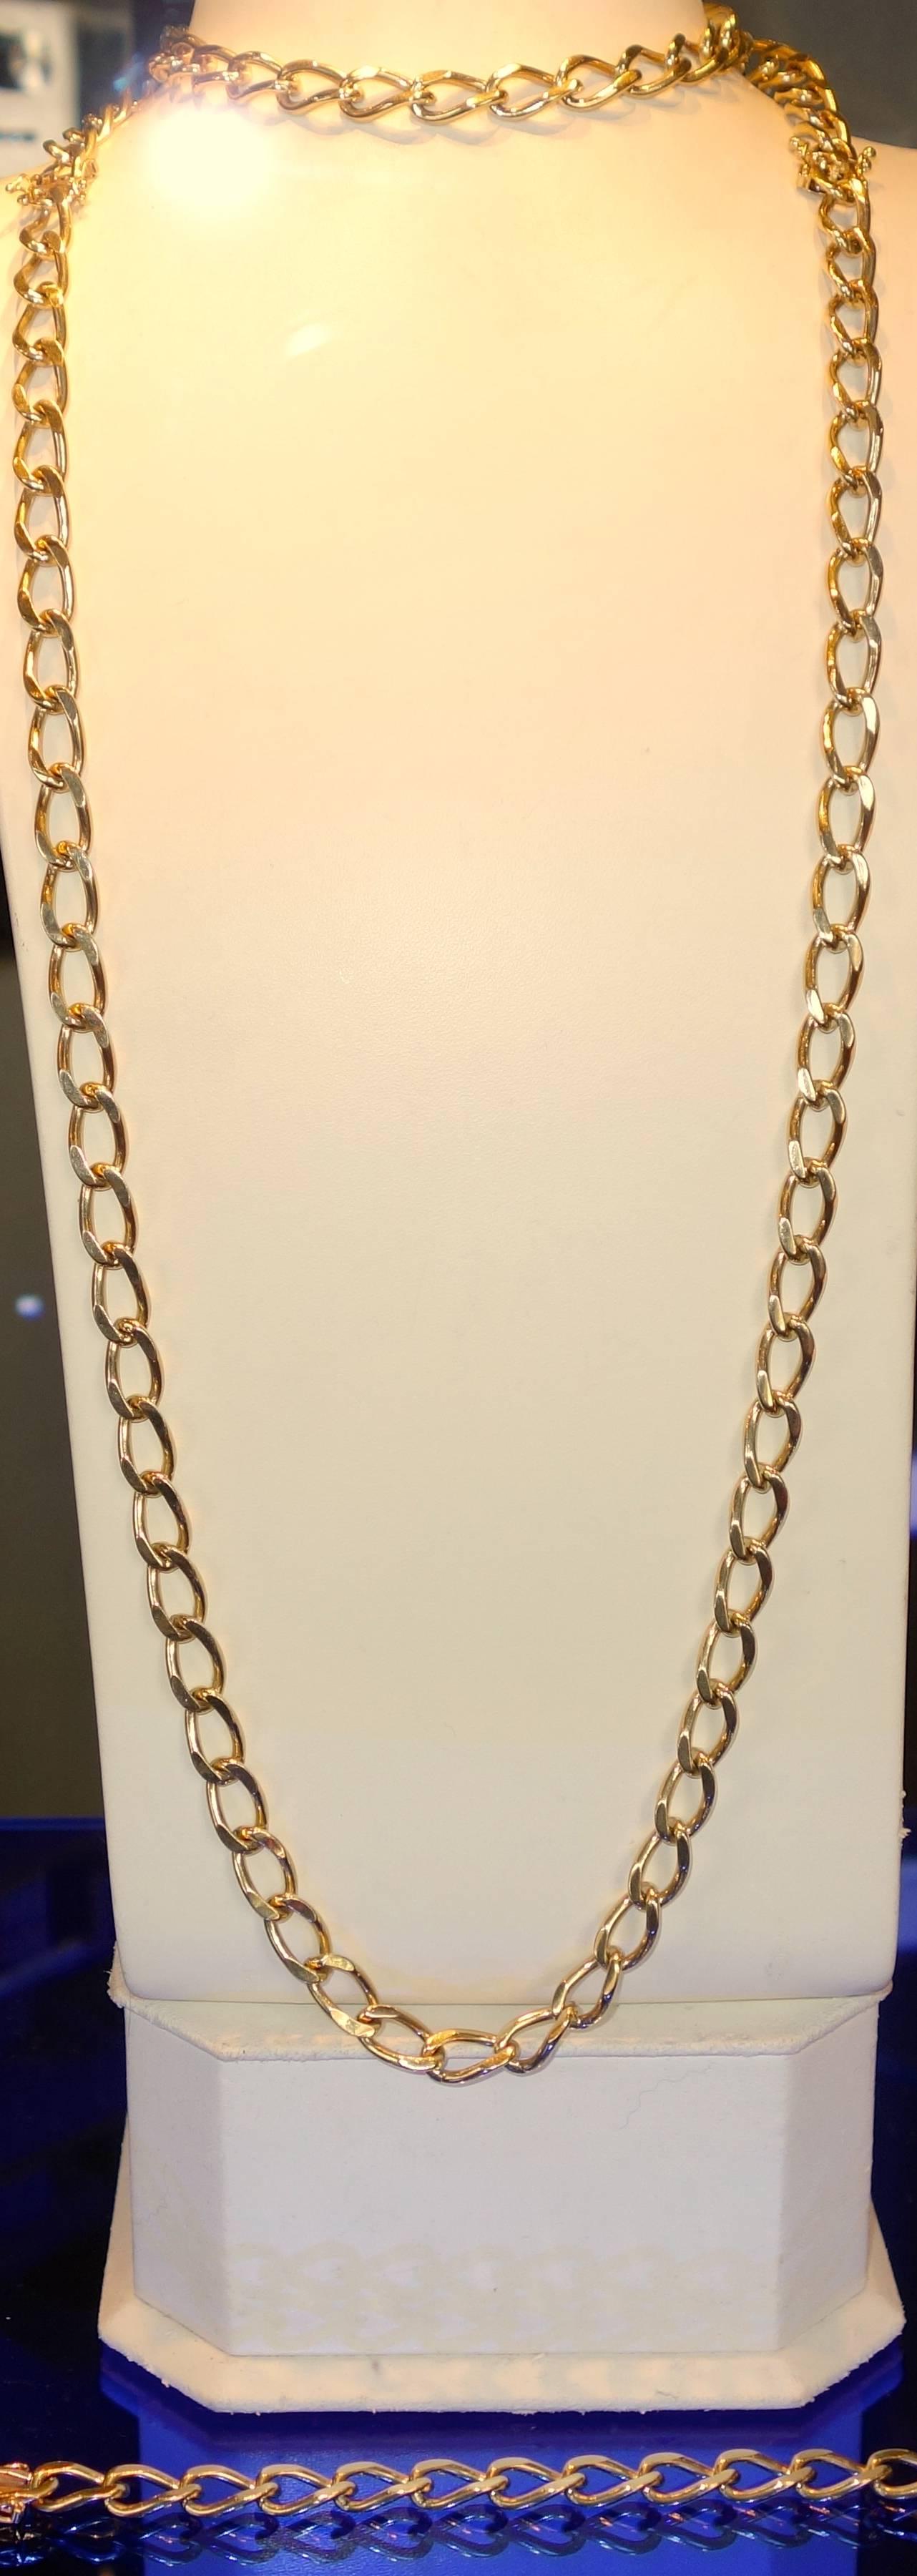 Over 61 inches long and weighing 251.35 grams (8.08 try ounces).  This long gold chain separates so that one can wear a bracelet and two shorter chains.  Very versatile with a Chanel-like look, this chain can be worn on many occasions and with just